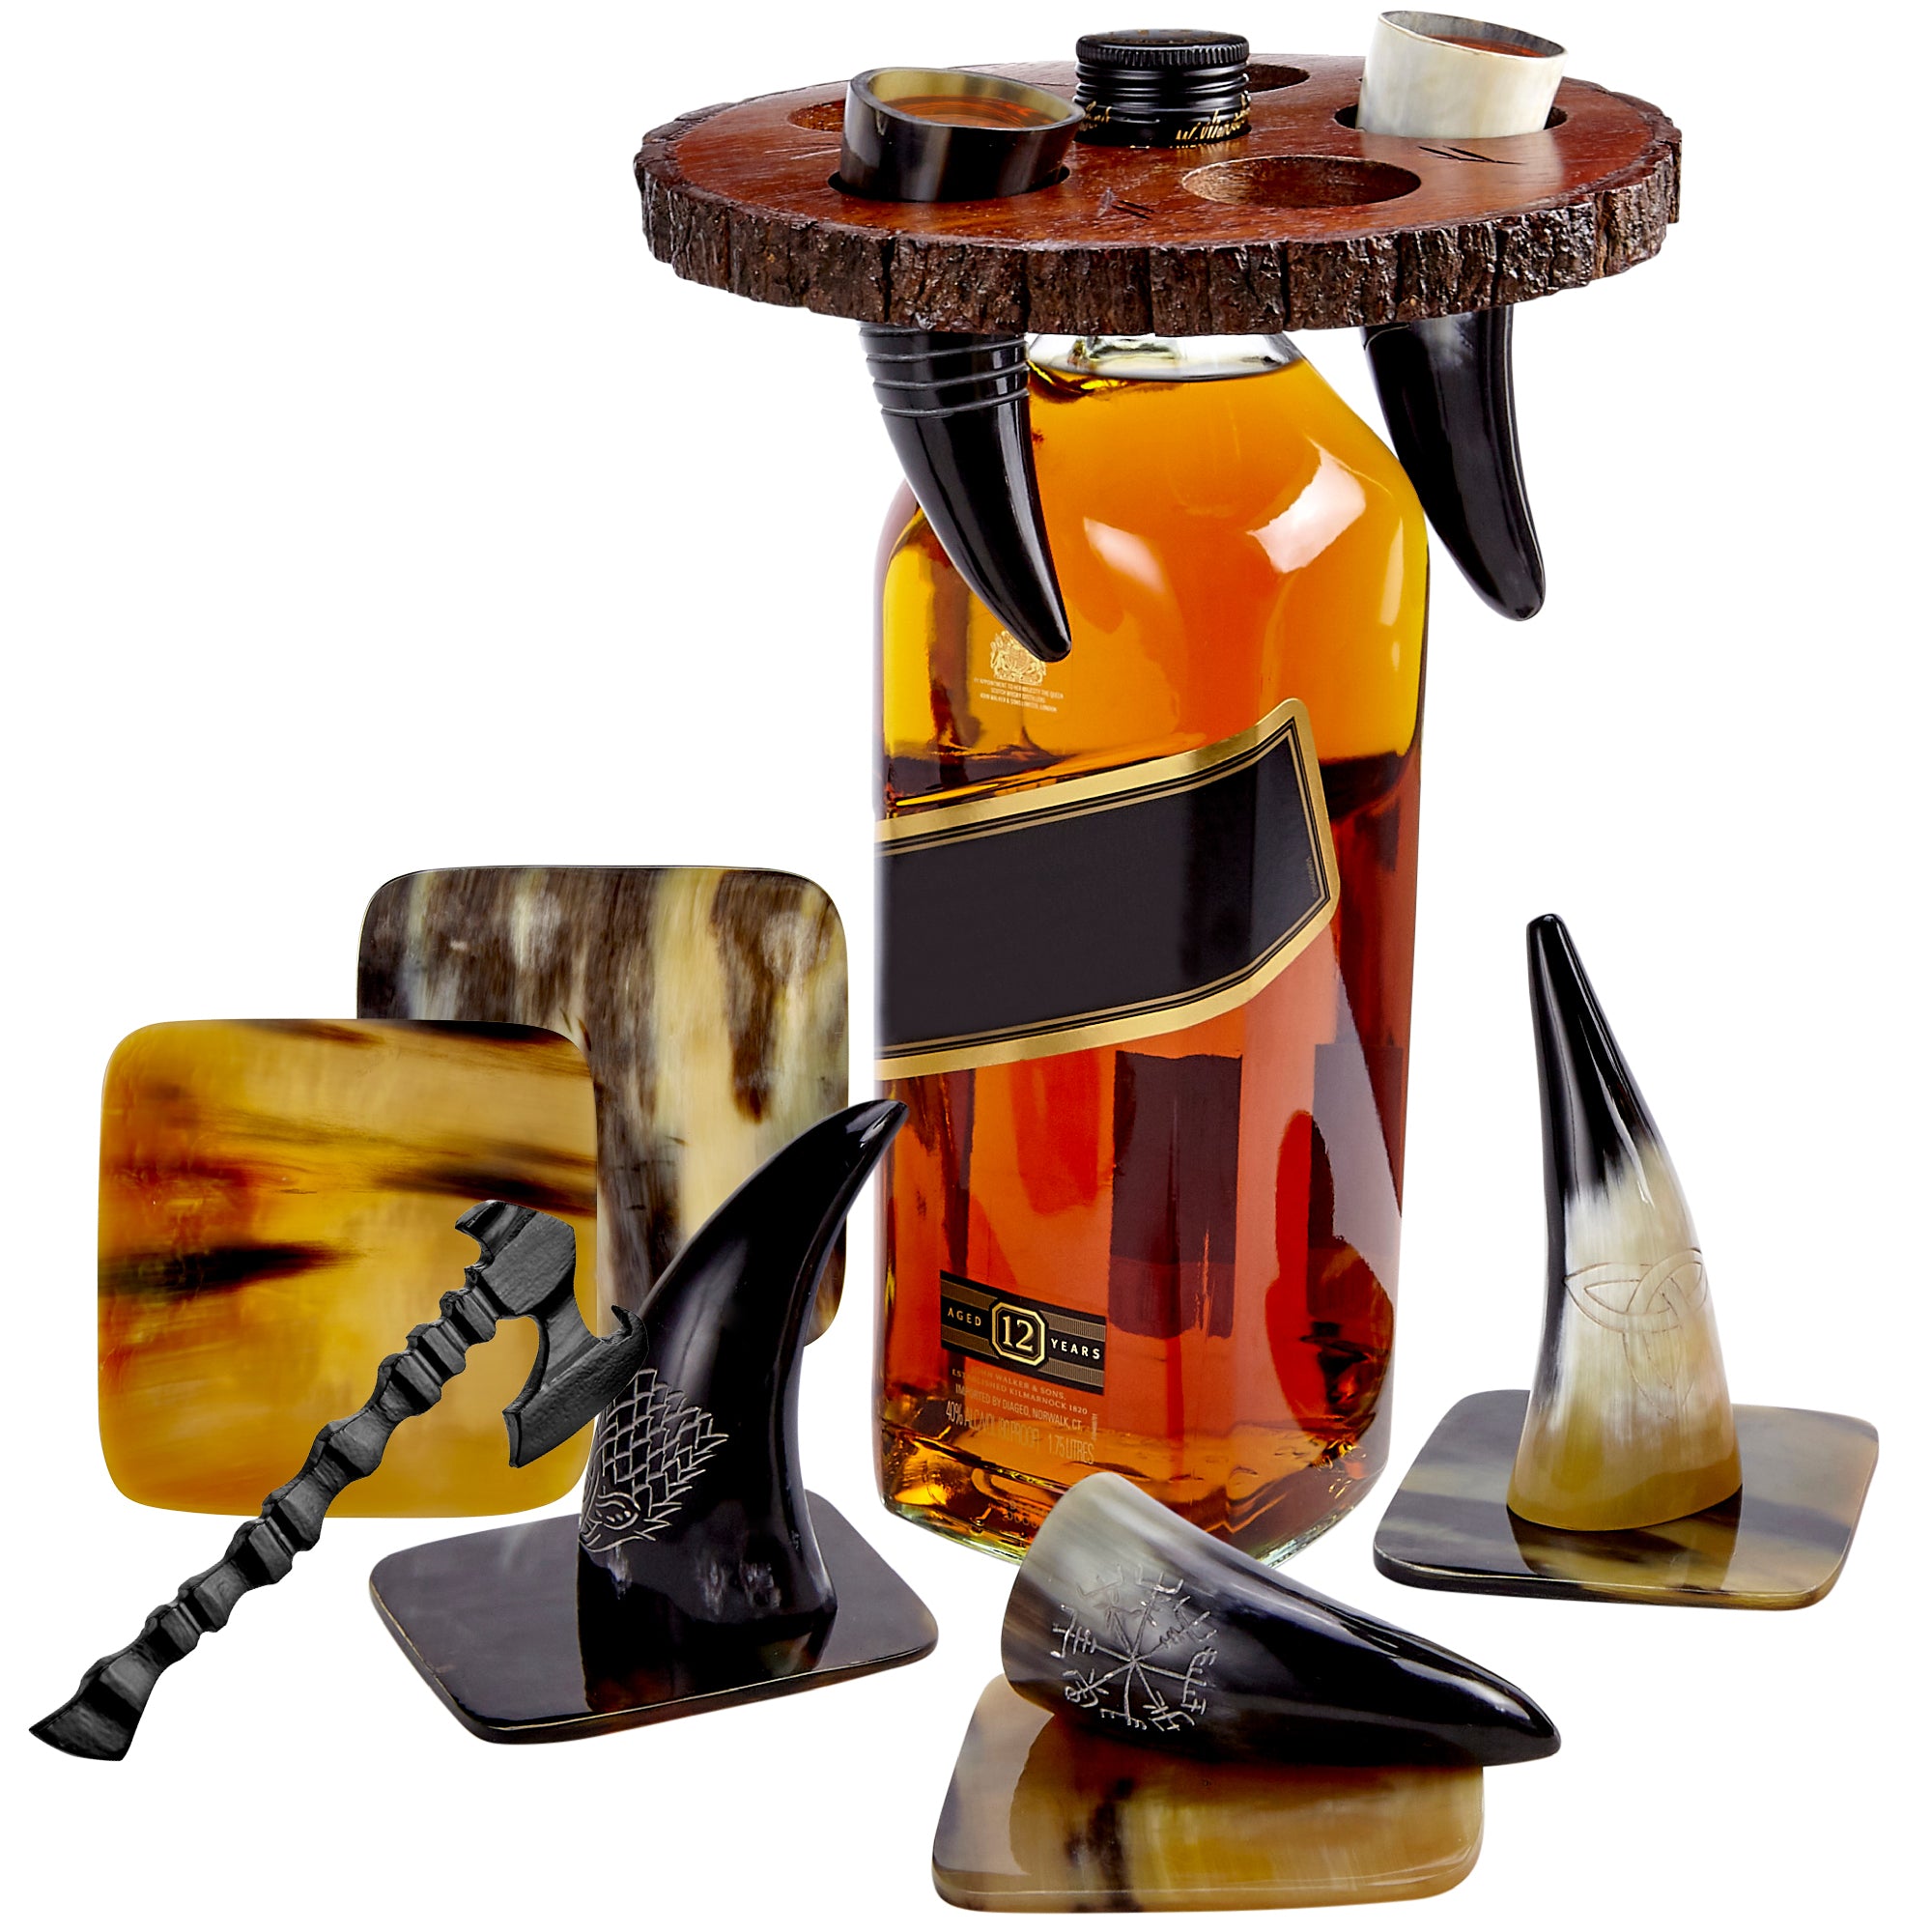 Viking Culture Viking Horn Drinking Cup Shot Glasses with Vintage Axe Bottle Opener, Coasters, and Rustic Wood Display Stand, Toasting Vessels for Party, Event, Bachelors